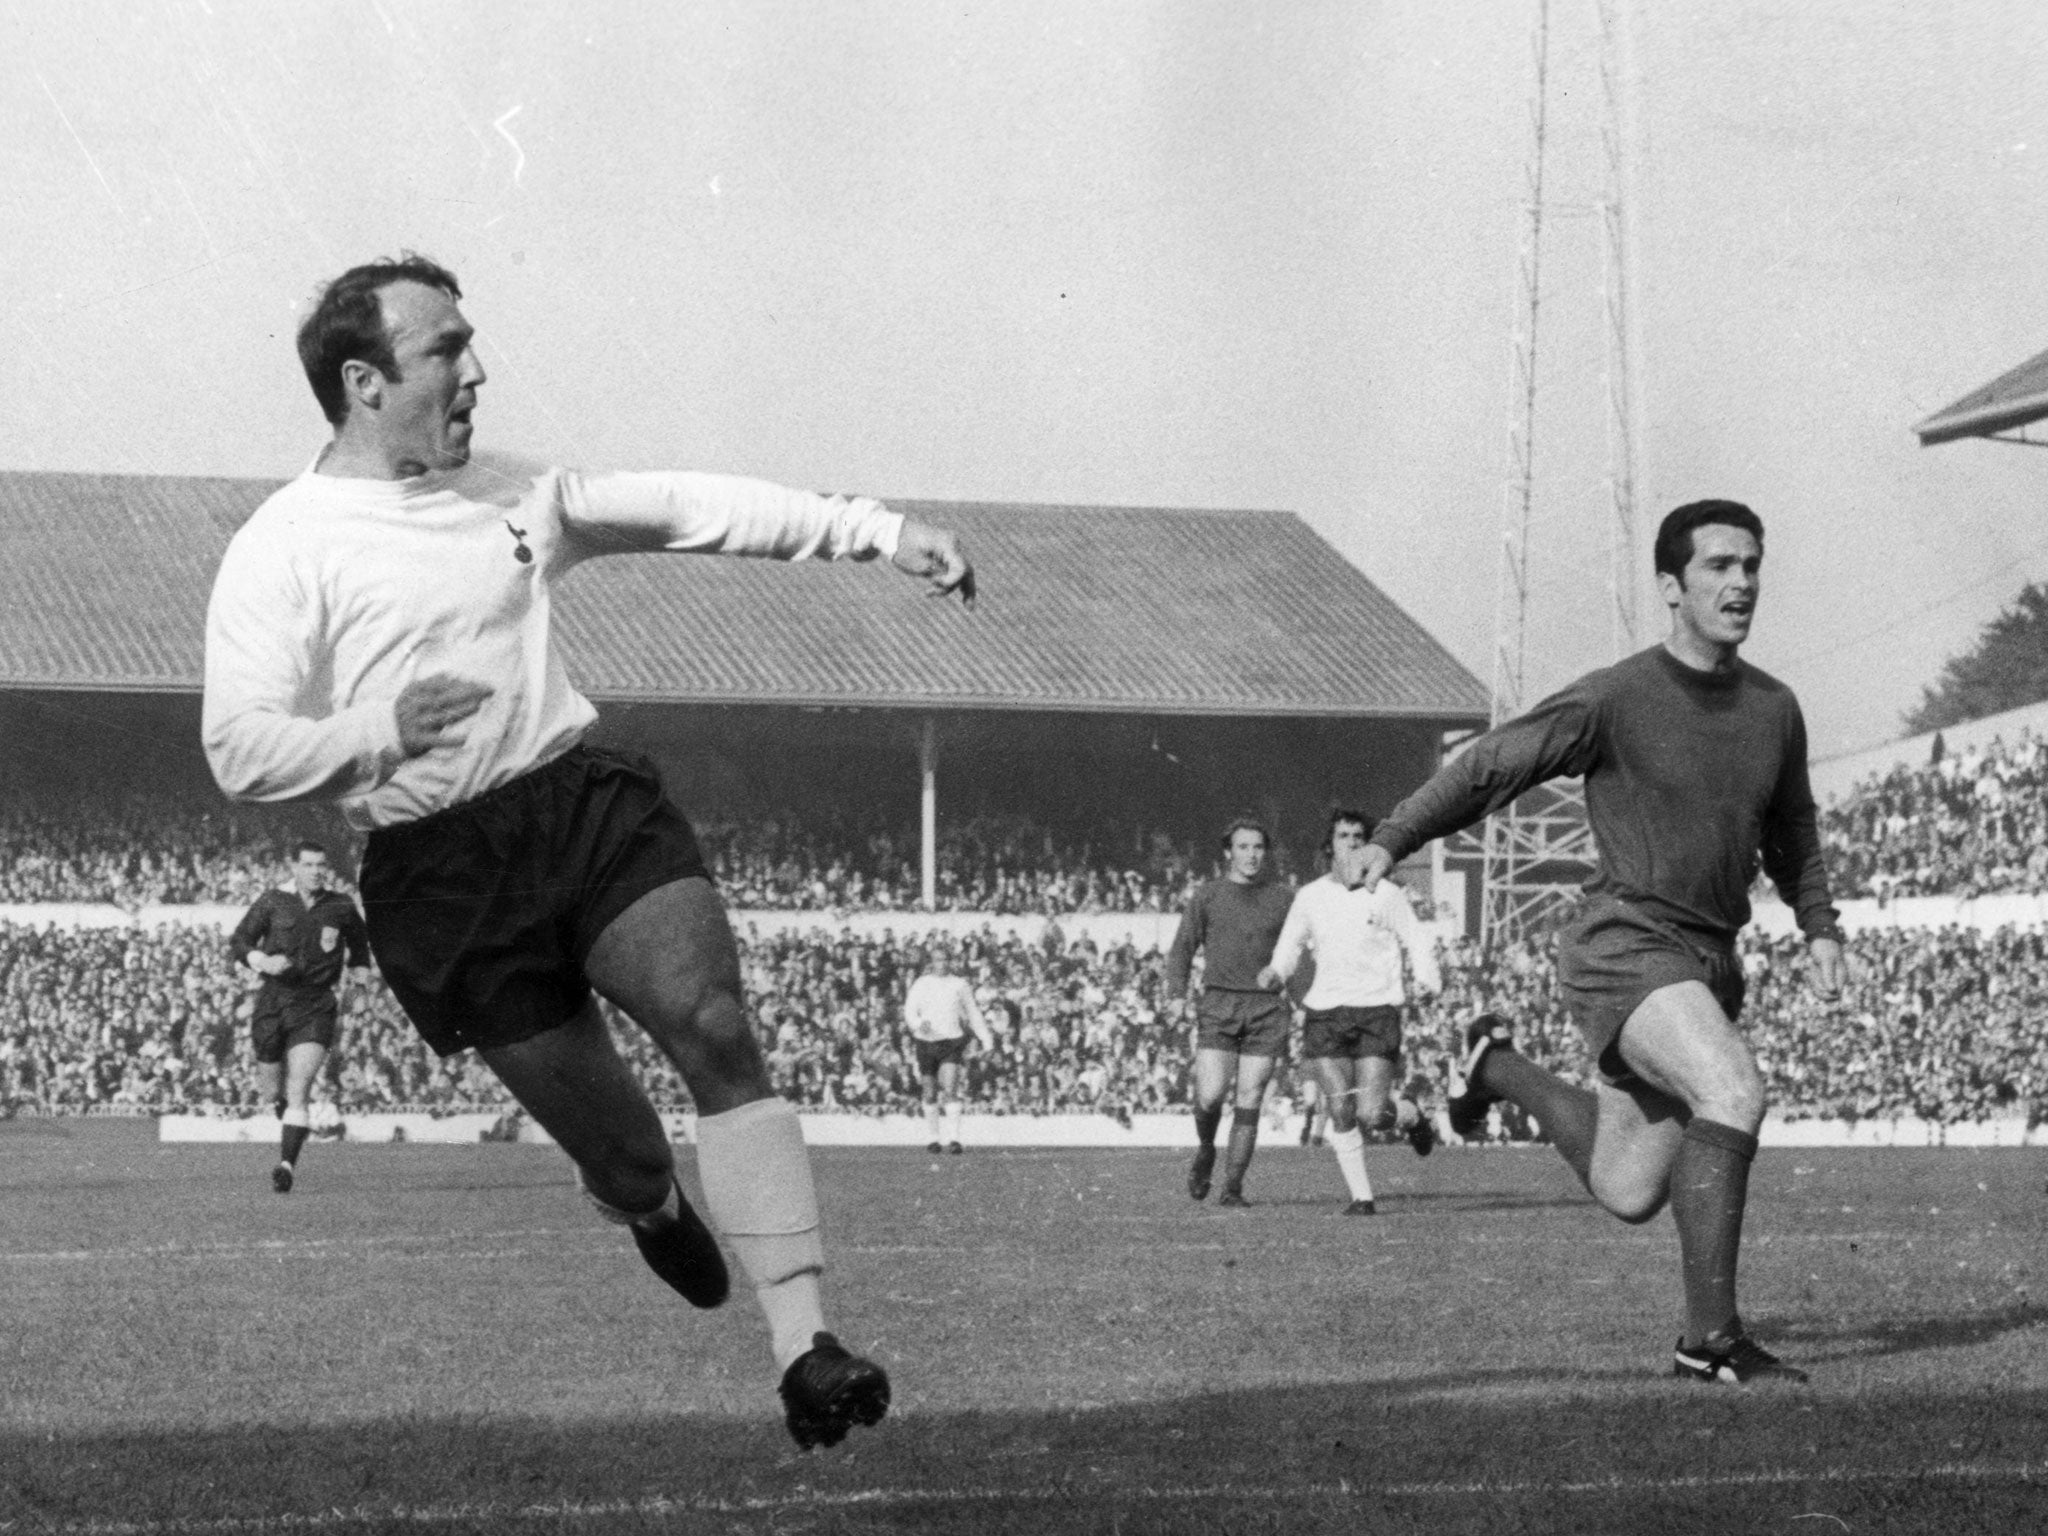 Jimmy Greaves tries a shot at goal as Spurs play Newcastle United at White Hart Lane in 1969.